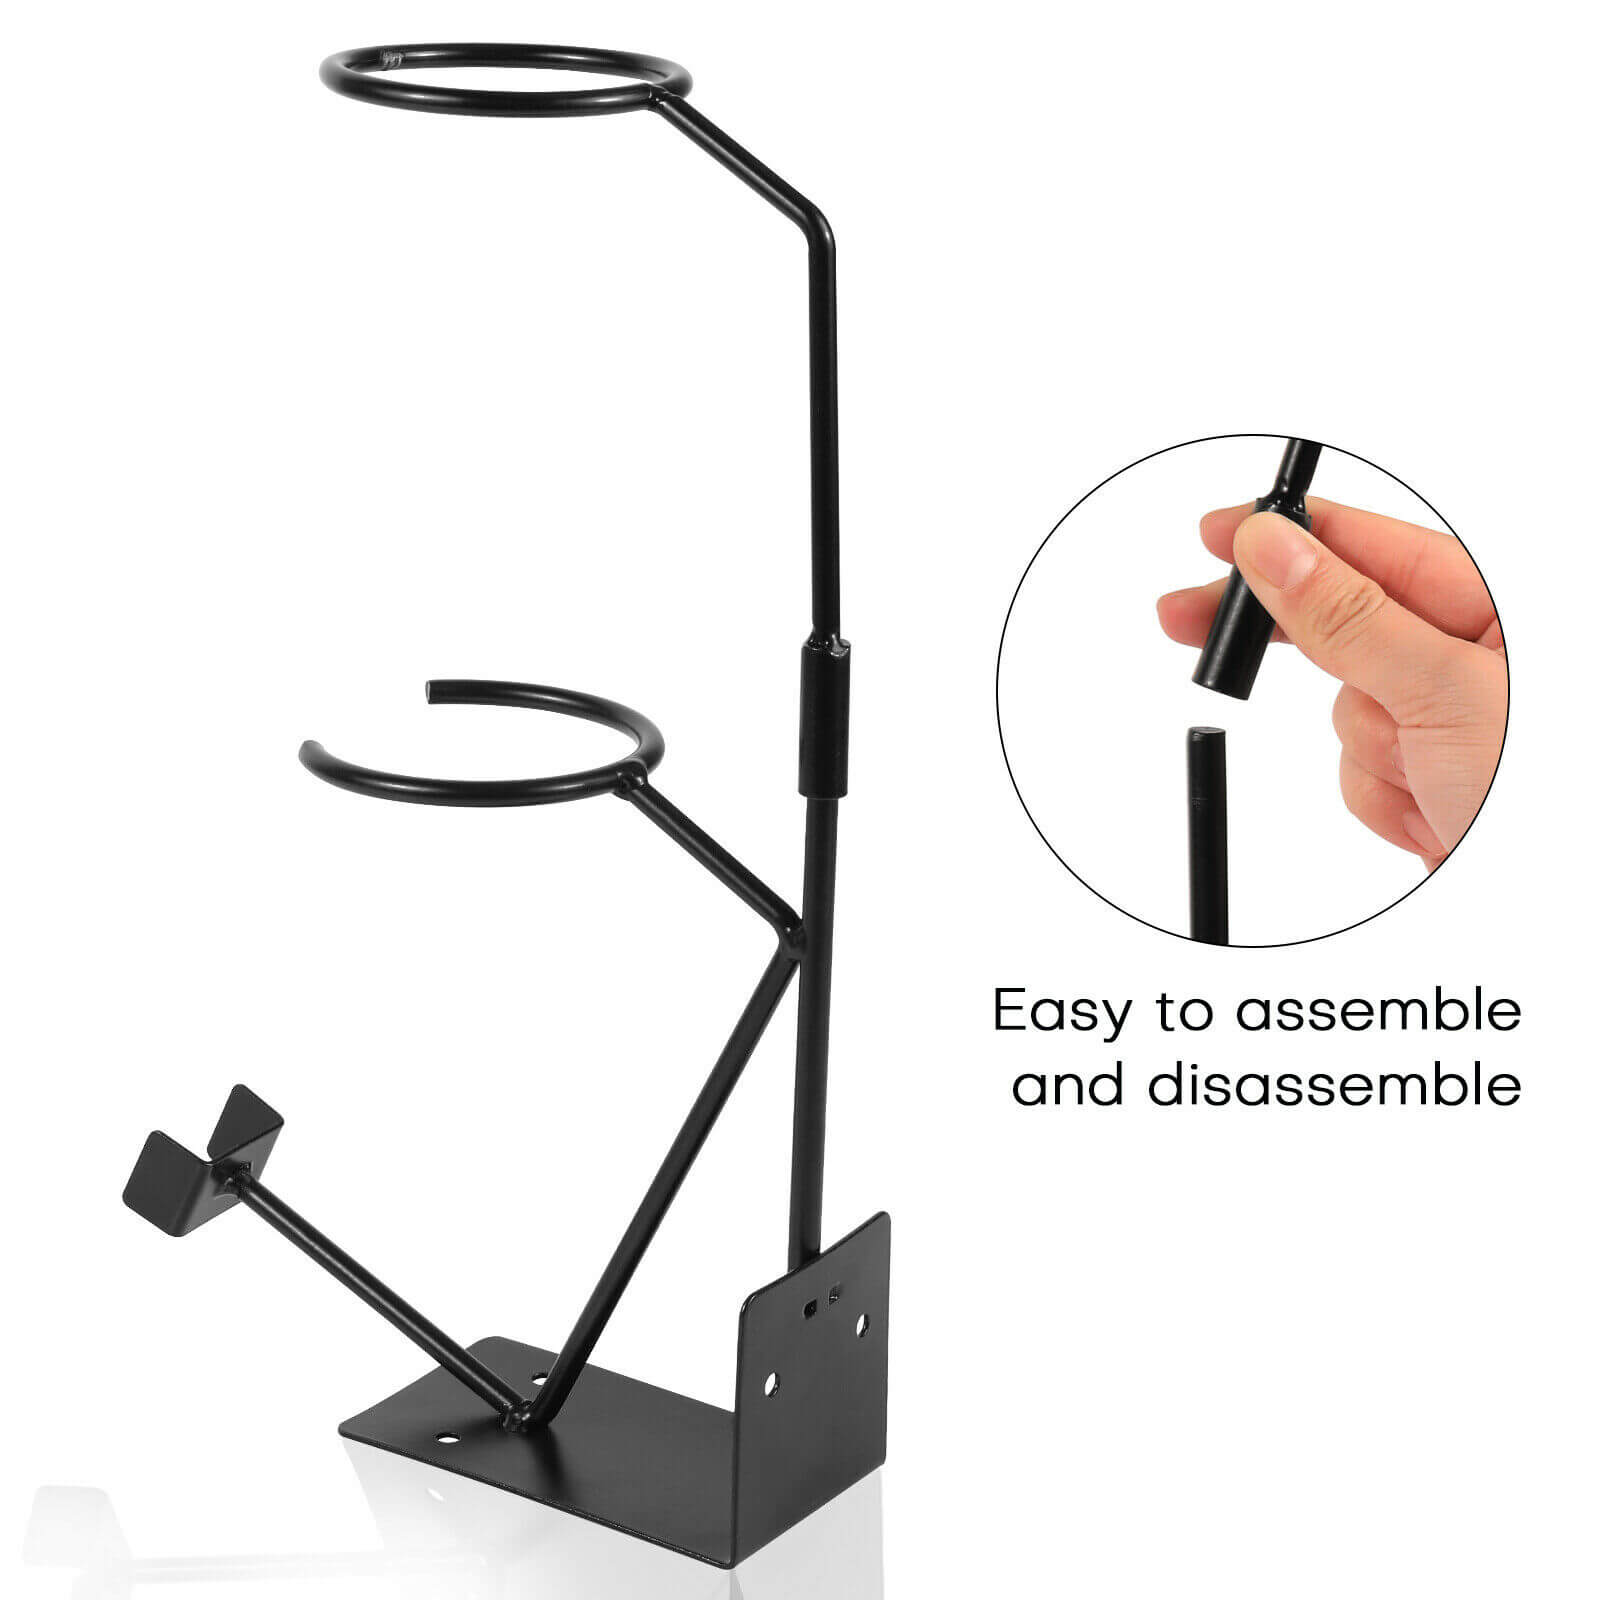 Gravity gun holder stand is easy to disassemble and assemble